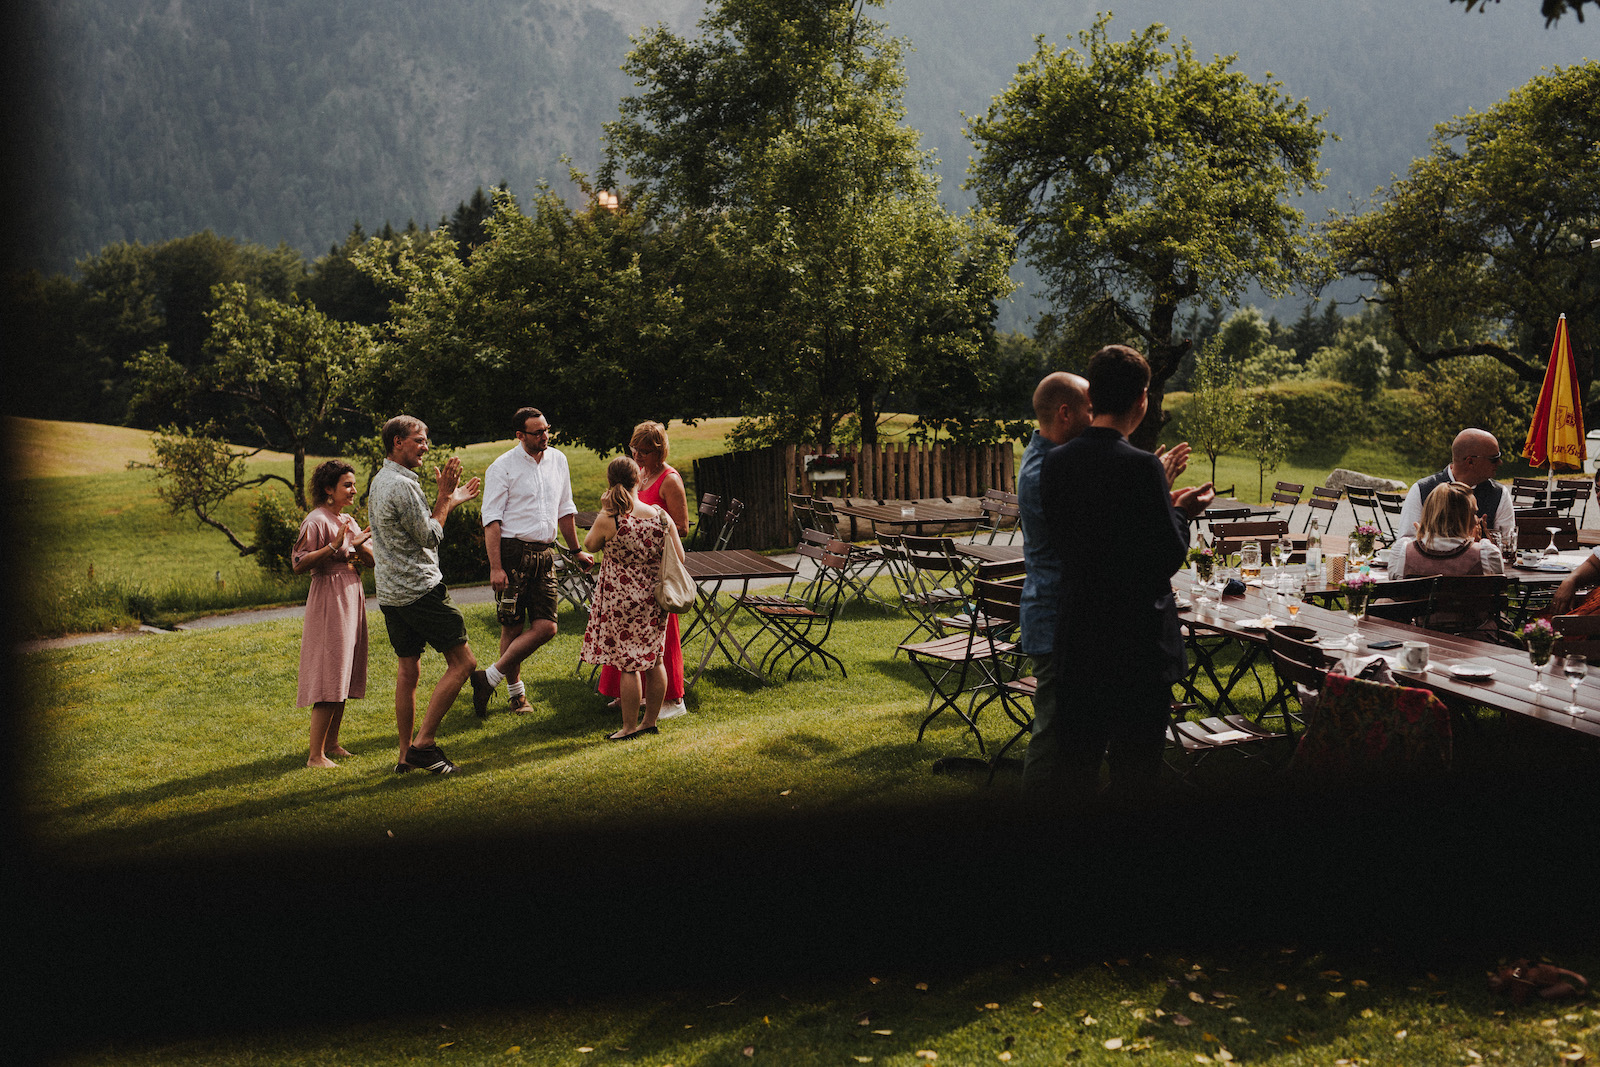 Andreas-Selter-Photography_Hochzeit_Berge_6694